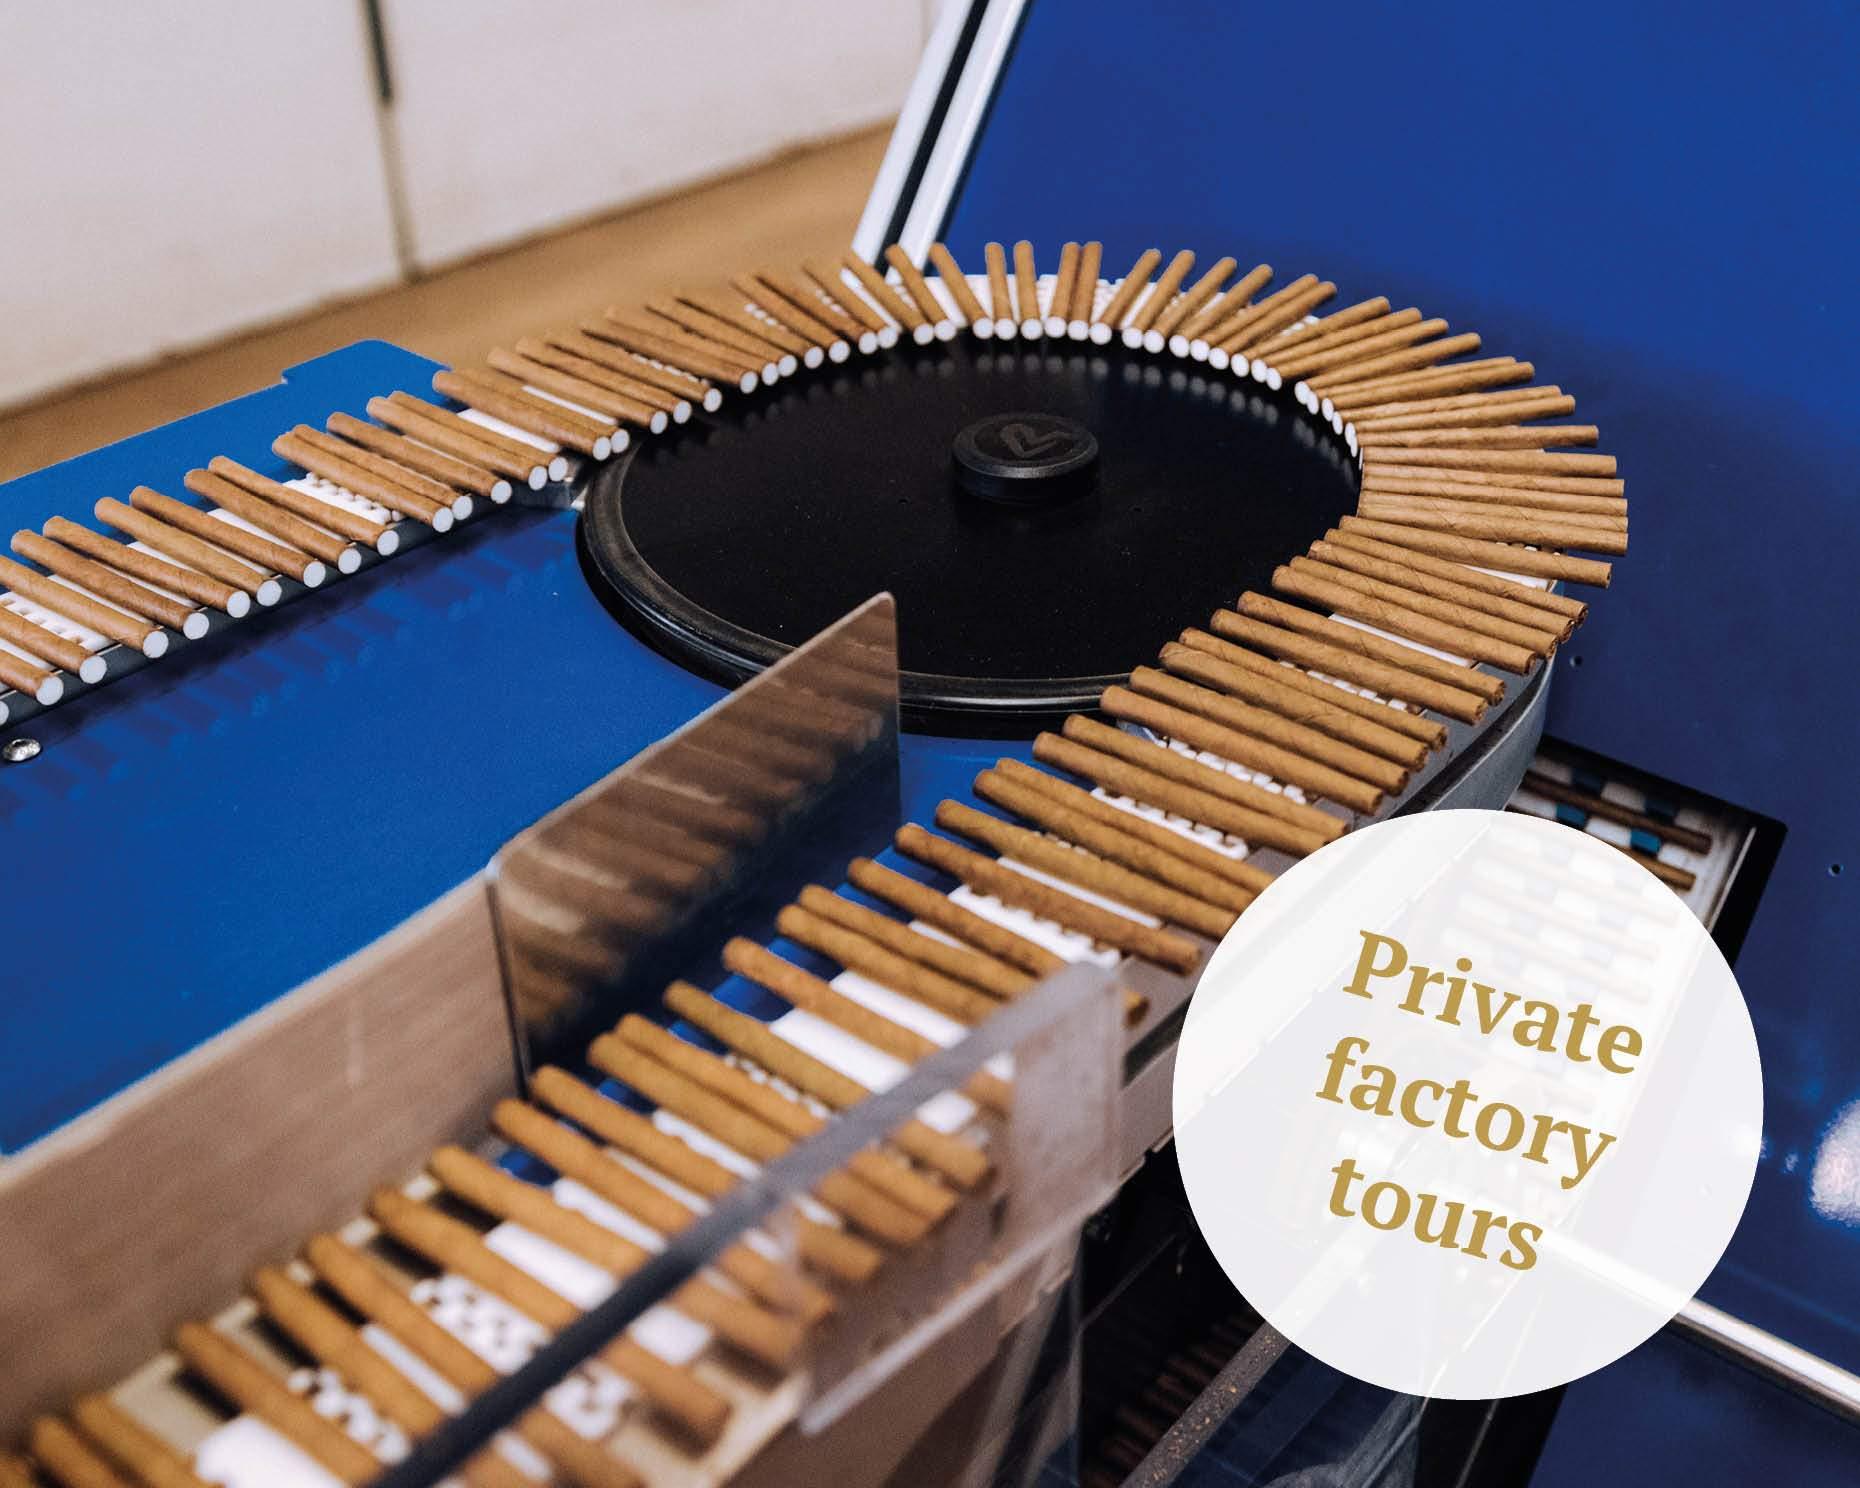 Private-factory-tours